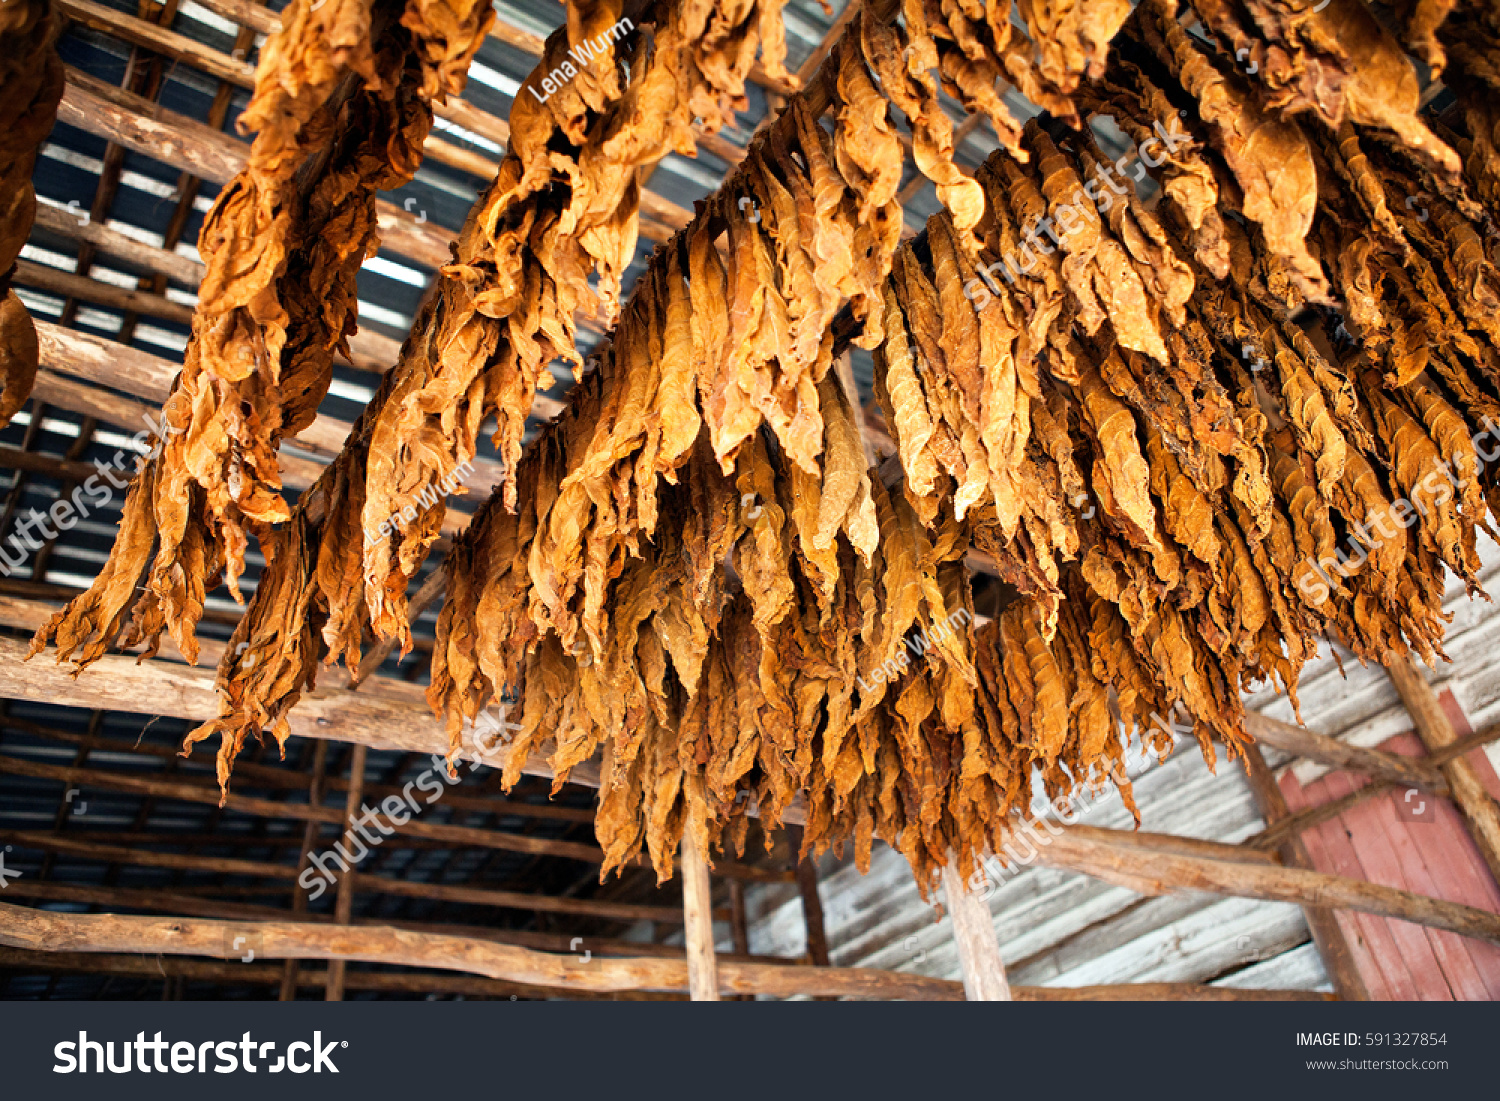 Tobacco Leaves Classical Way Drying Tobacco Stock Photo Edit Now 591327854